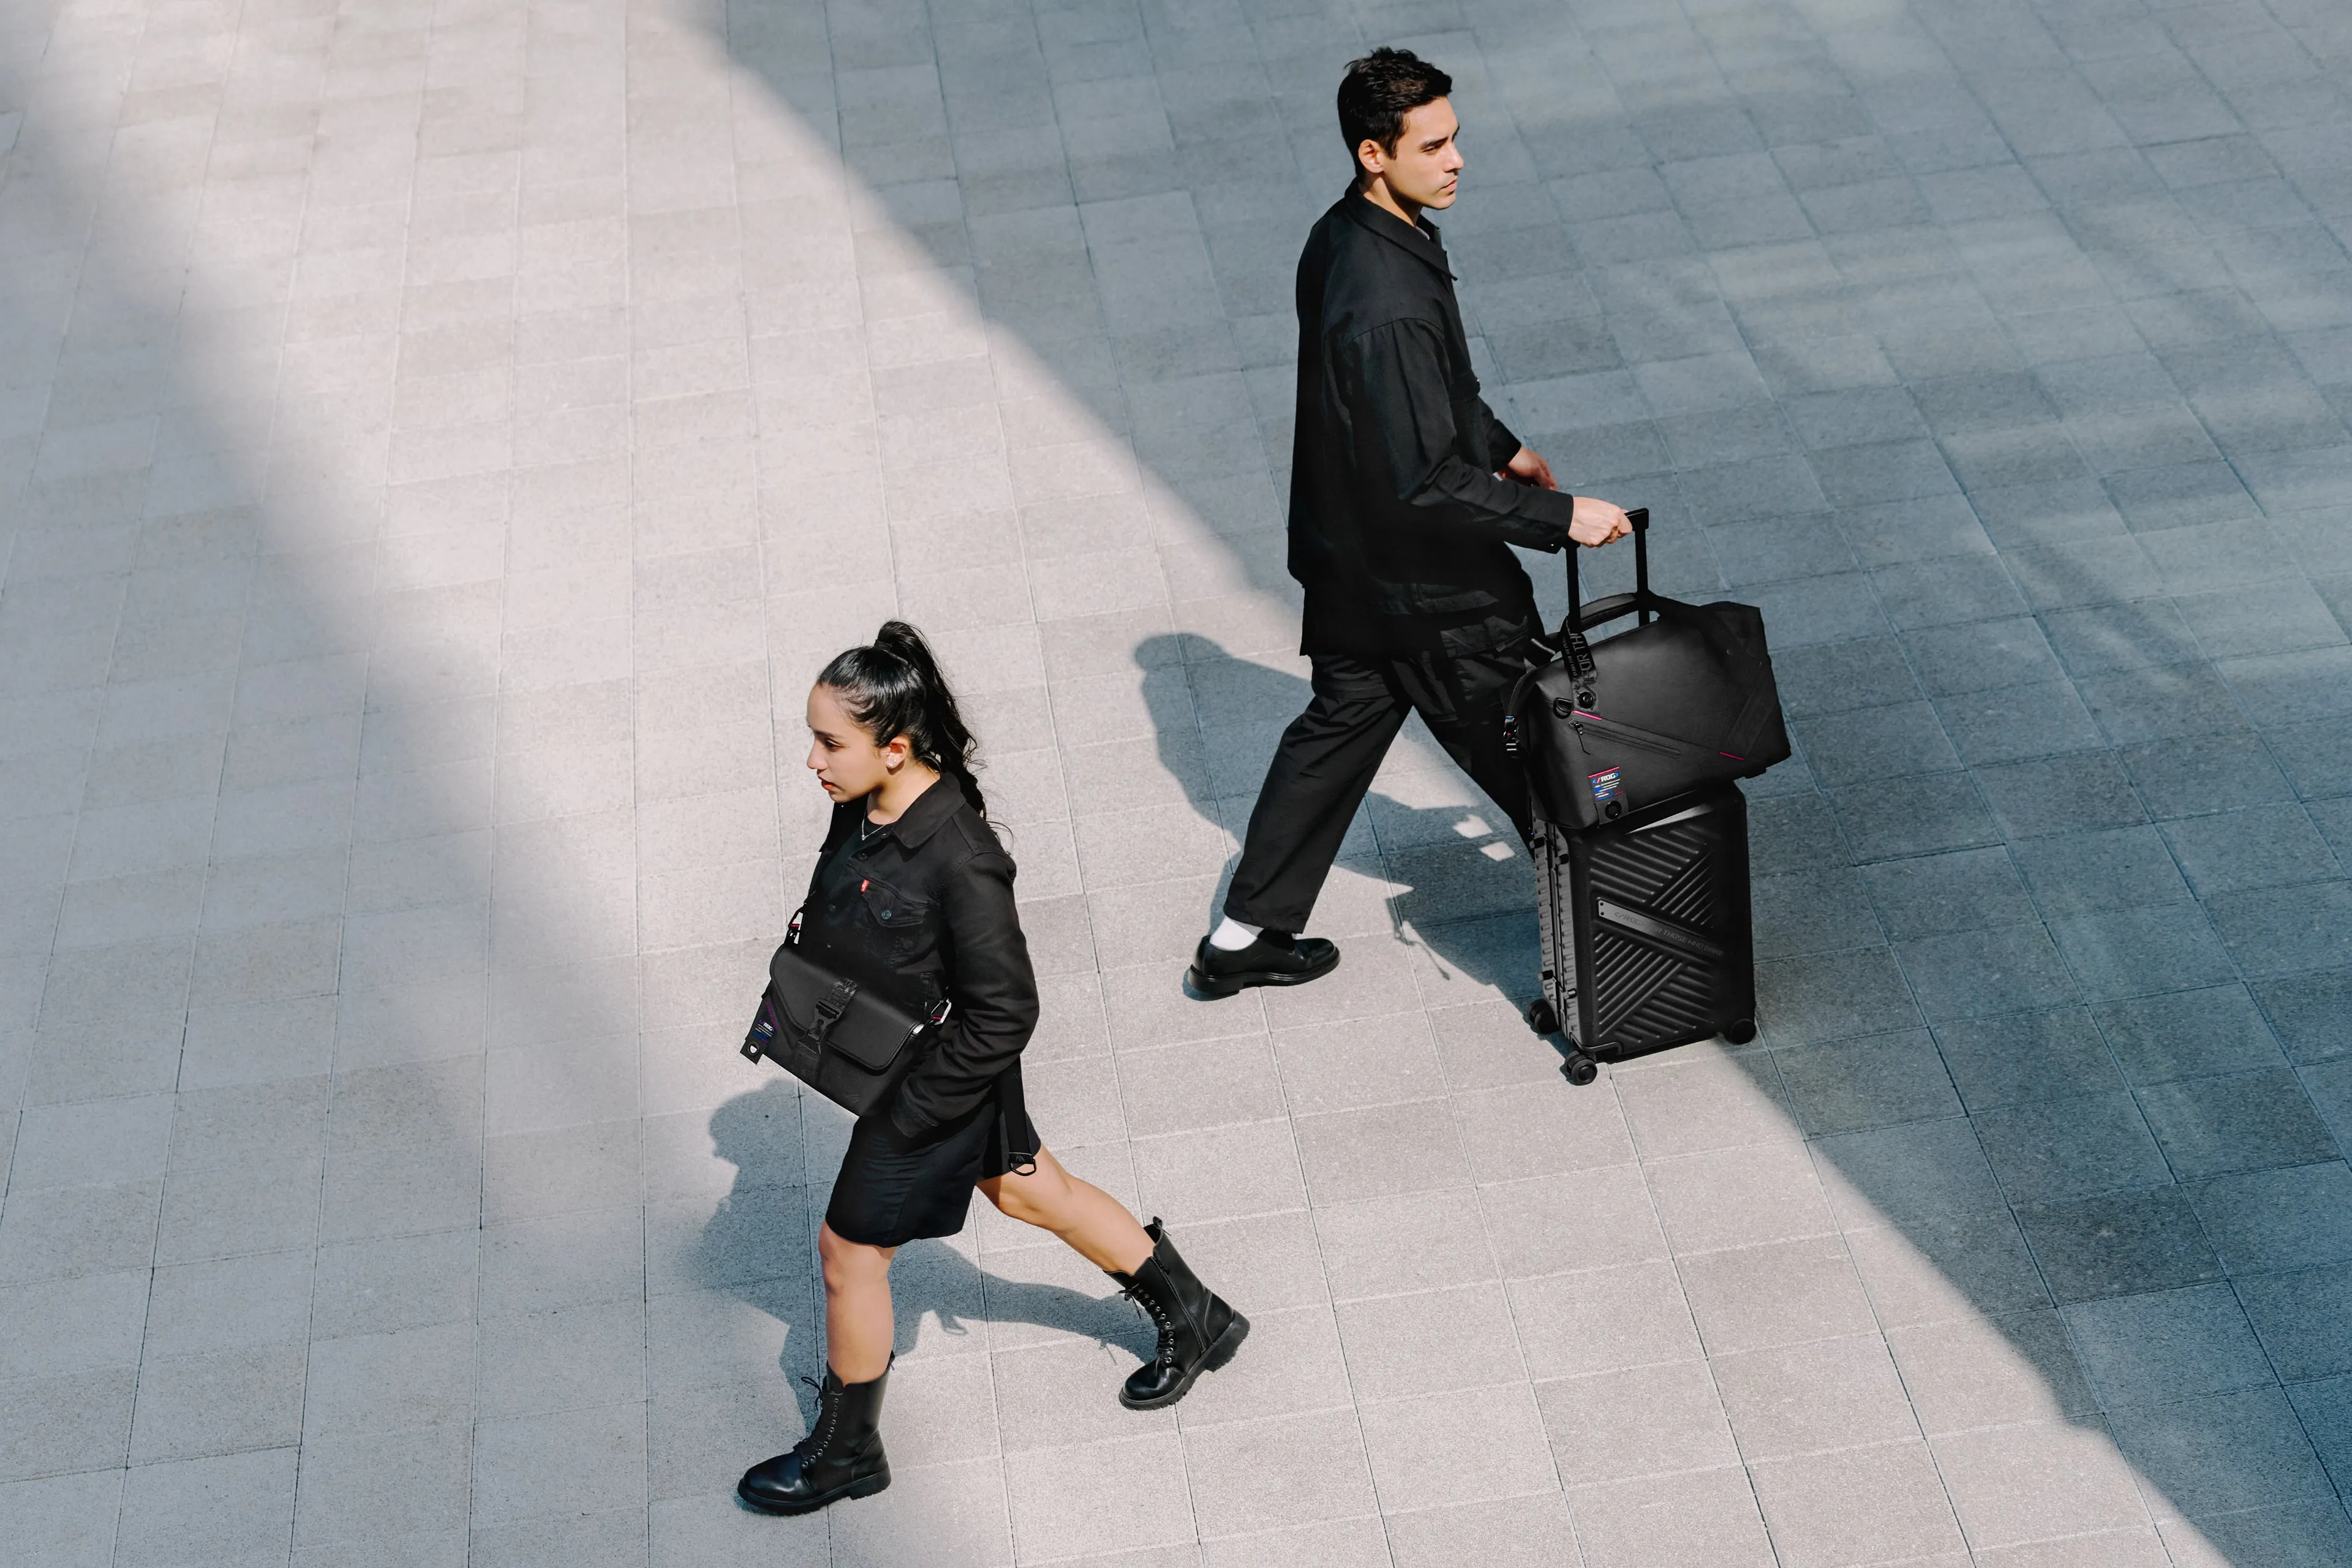 Two people passing each other on the street, with one using the ROG SLASH Sling Bag 2.0, and the other the ROG SLASH Hard Case Luggage and ROG SLASH Duffle Bag